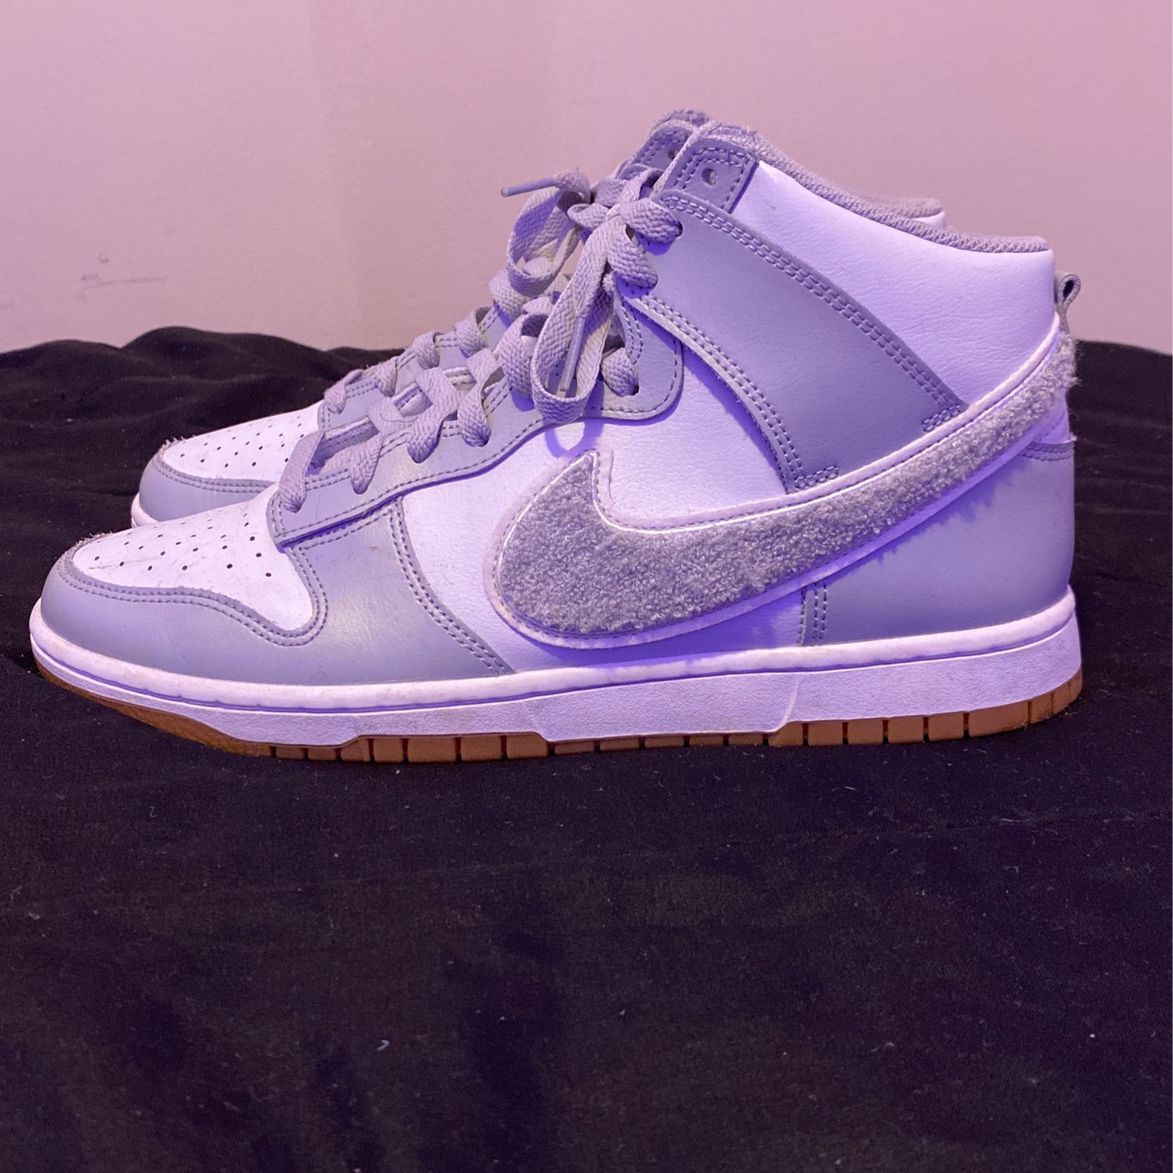 Nike Dunk Mids, Gray And White, 10.5